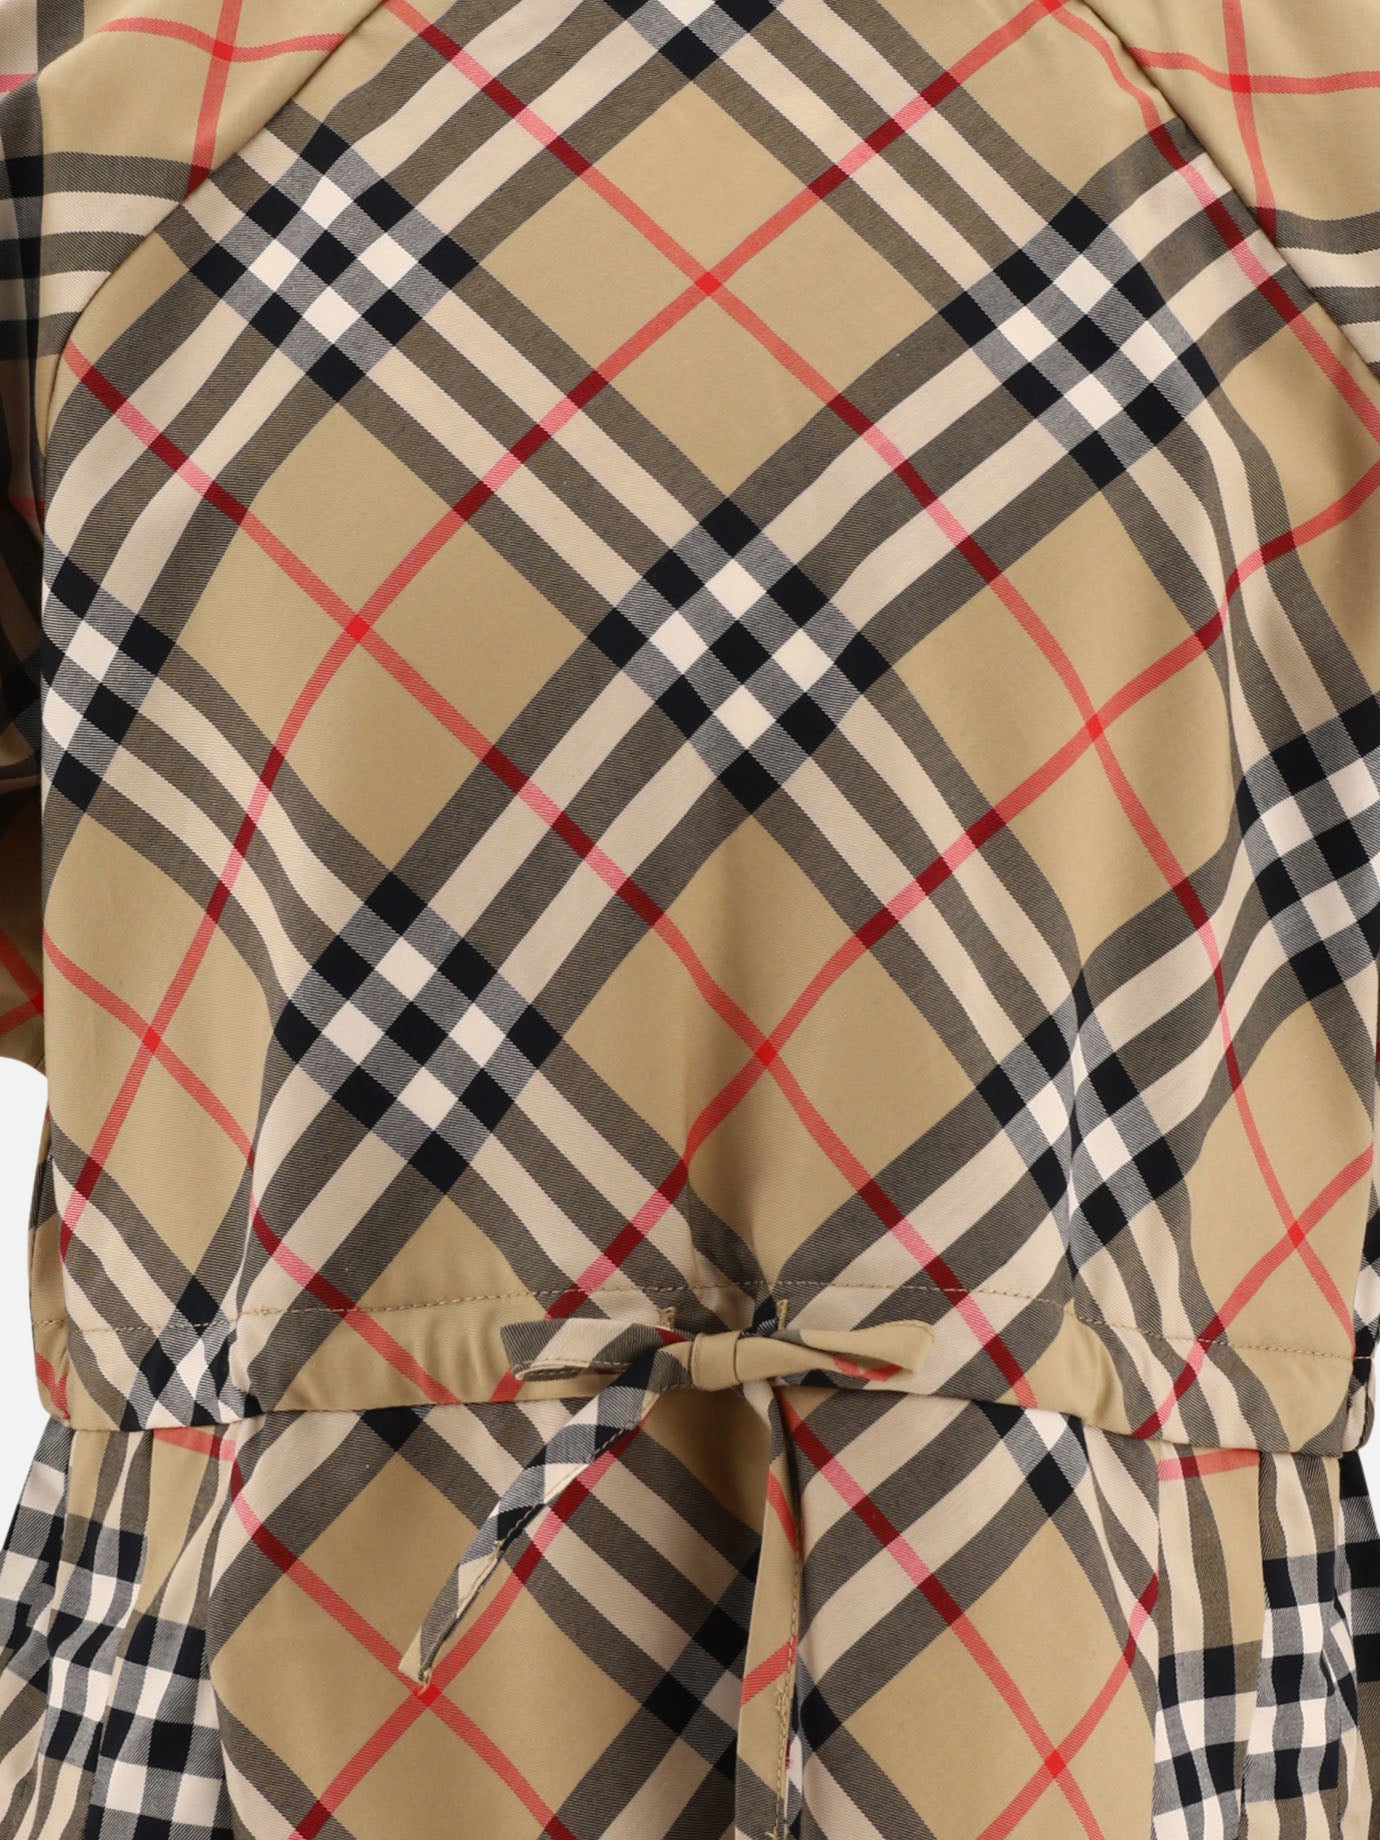 Pleated check dress